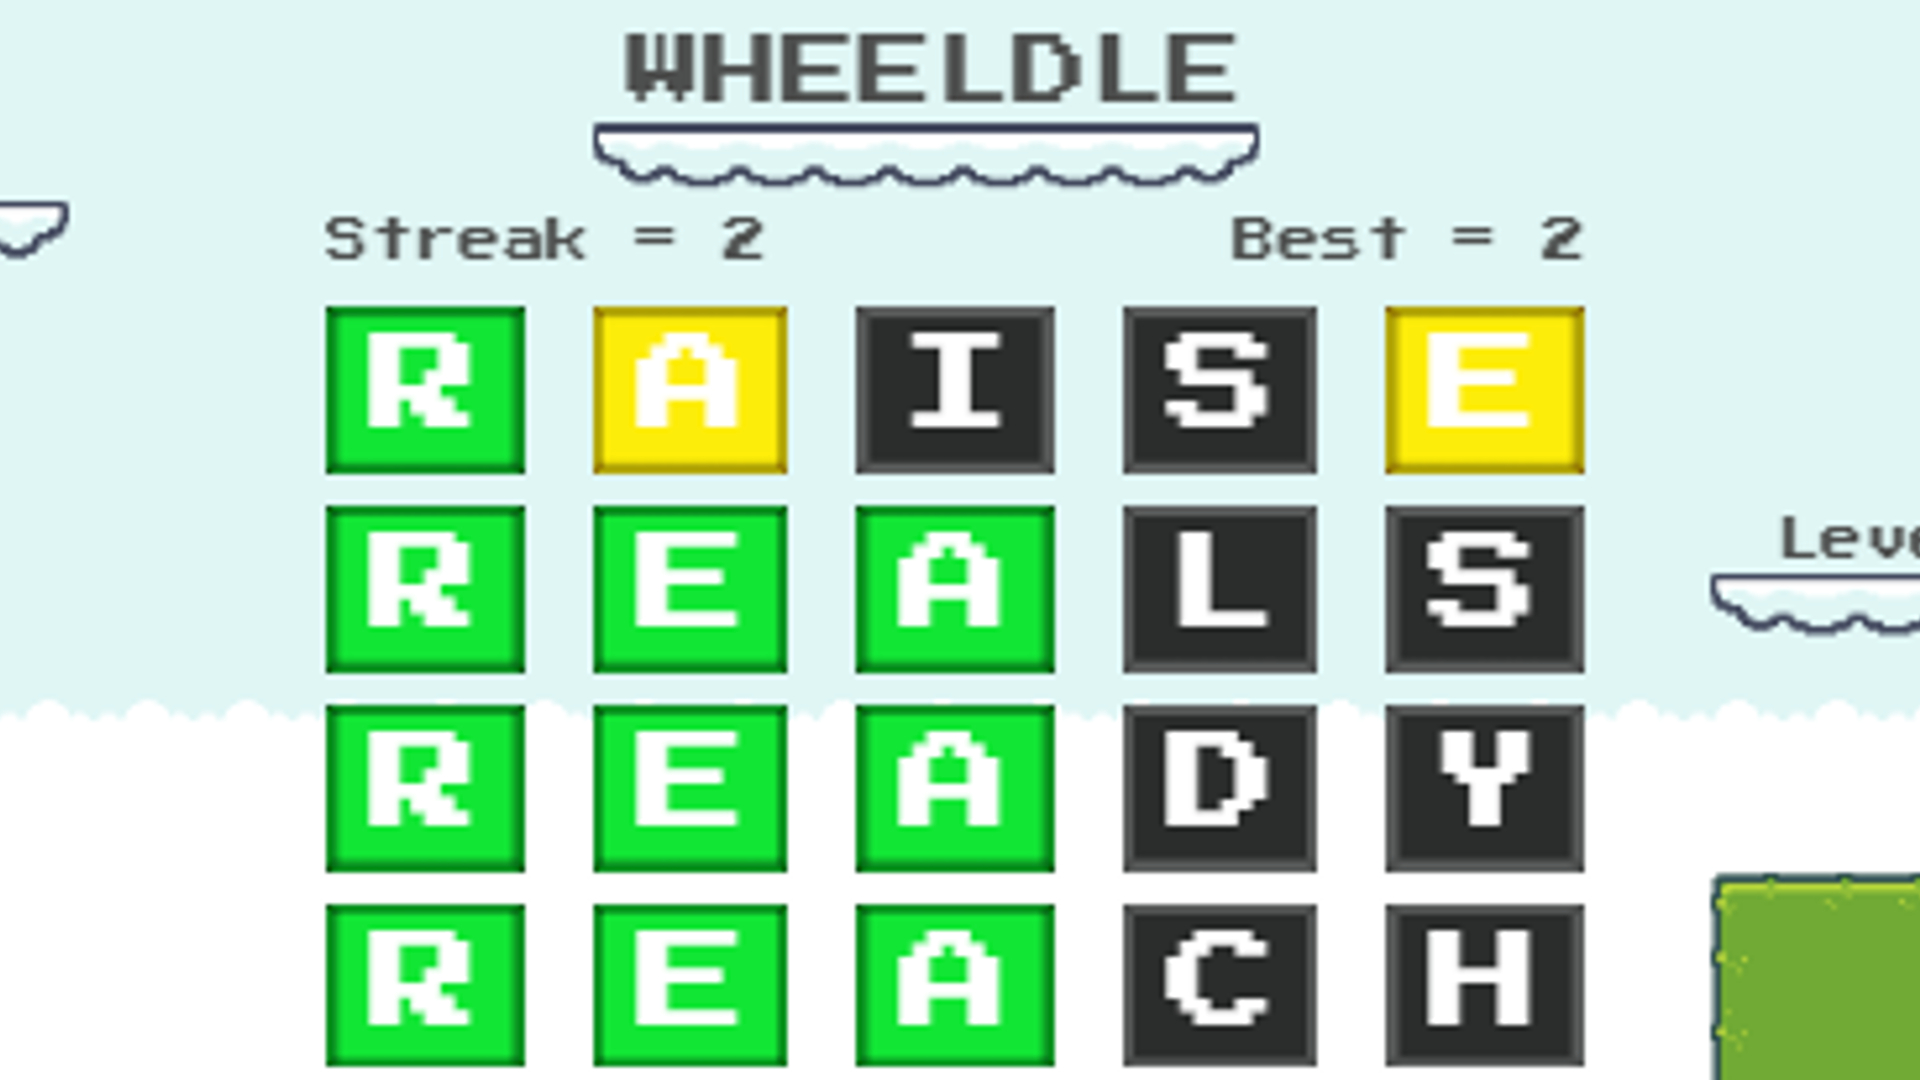 If one Wordle a day isn't enough, try the infinite Wheeldle | PC Gamer